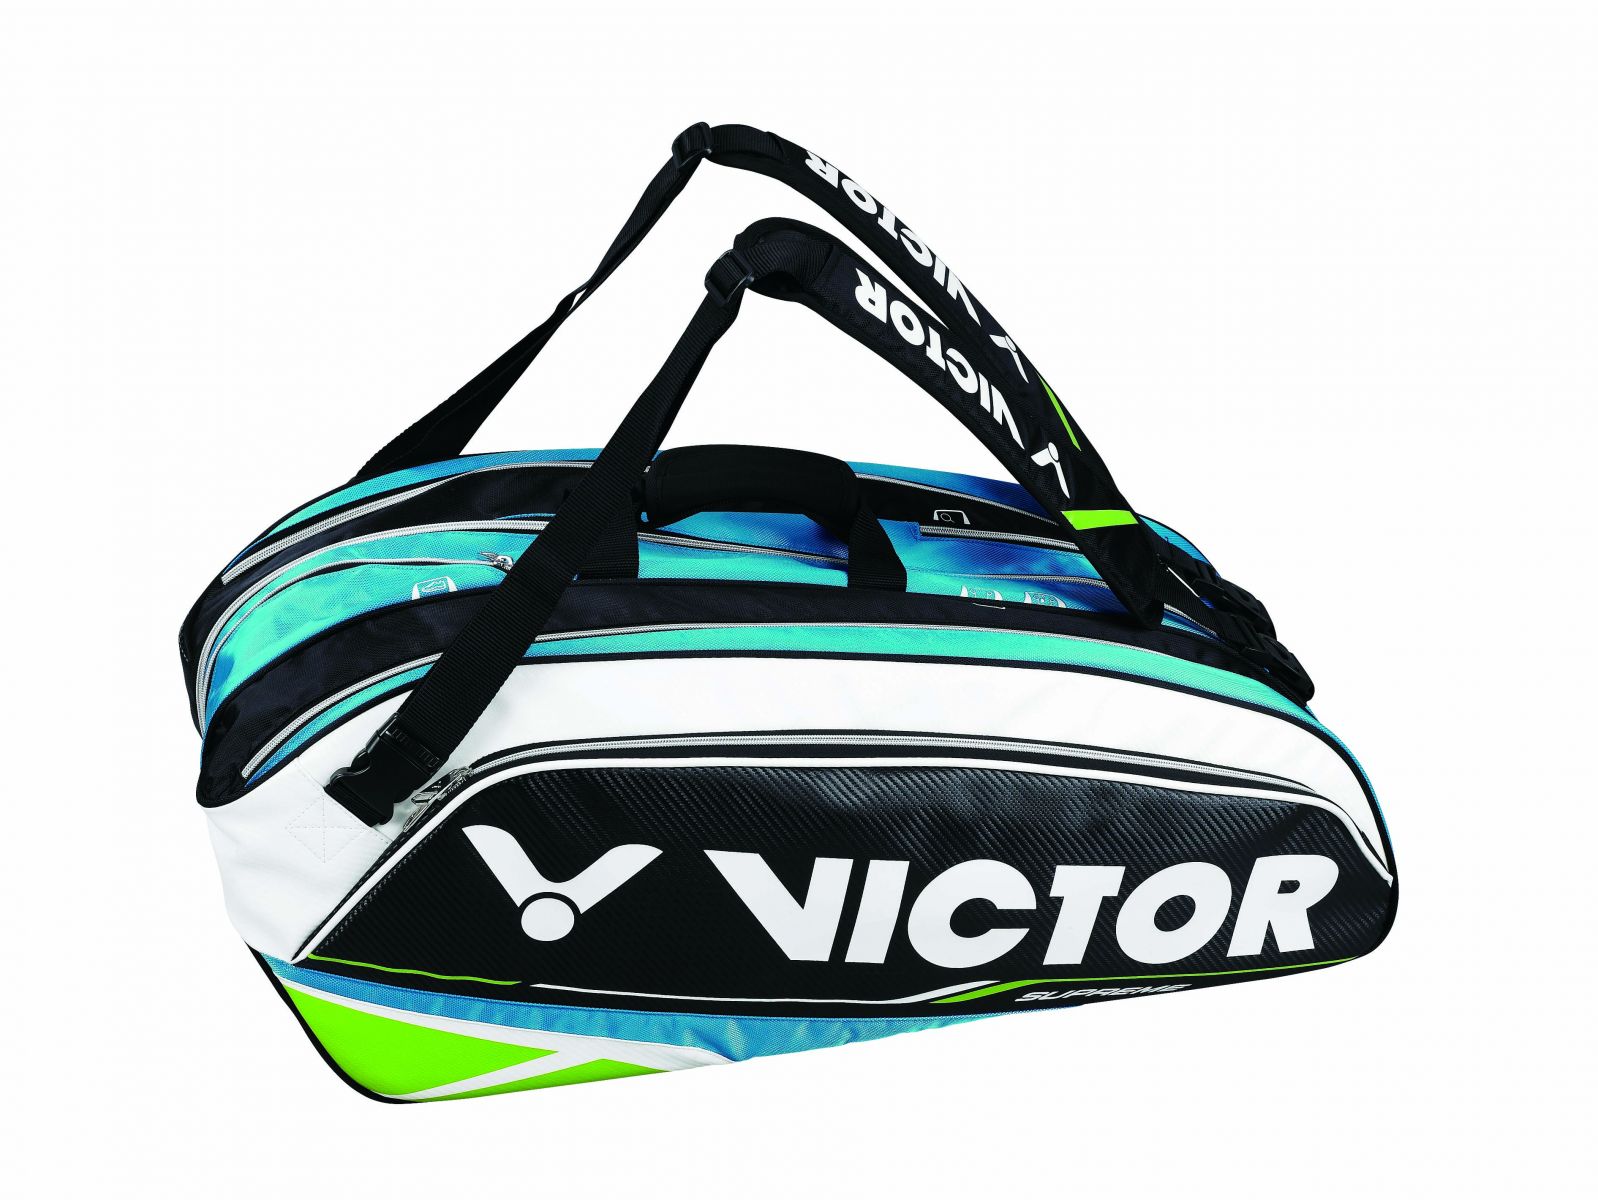 NEW COLORS OF 2015 VICTOR BADMINTON BAGS - VICTOR Badminton | Philippines